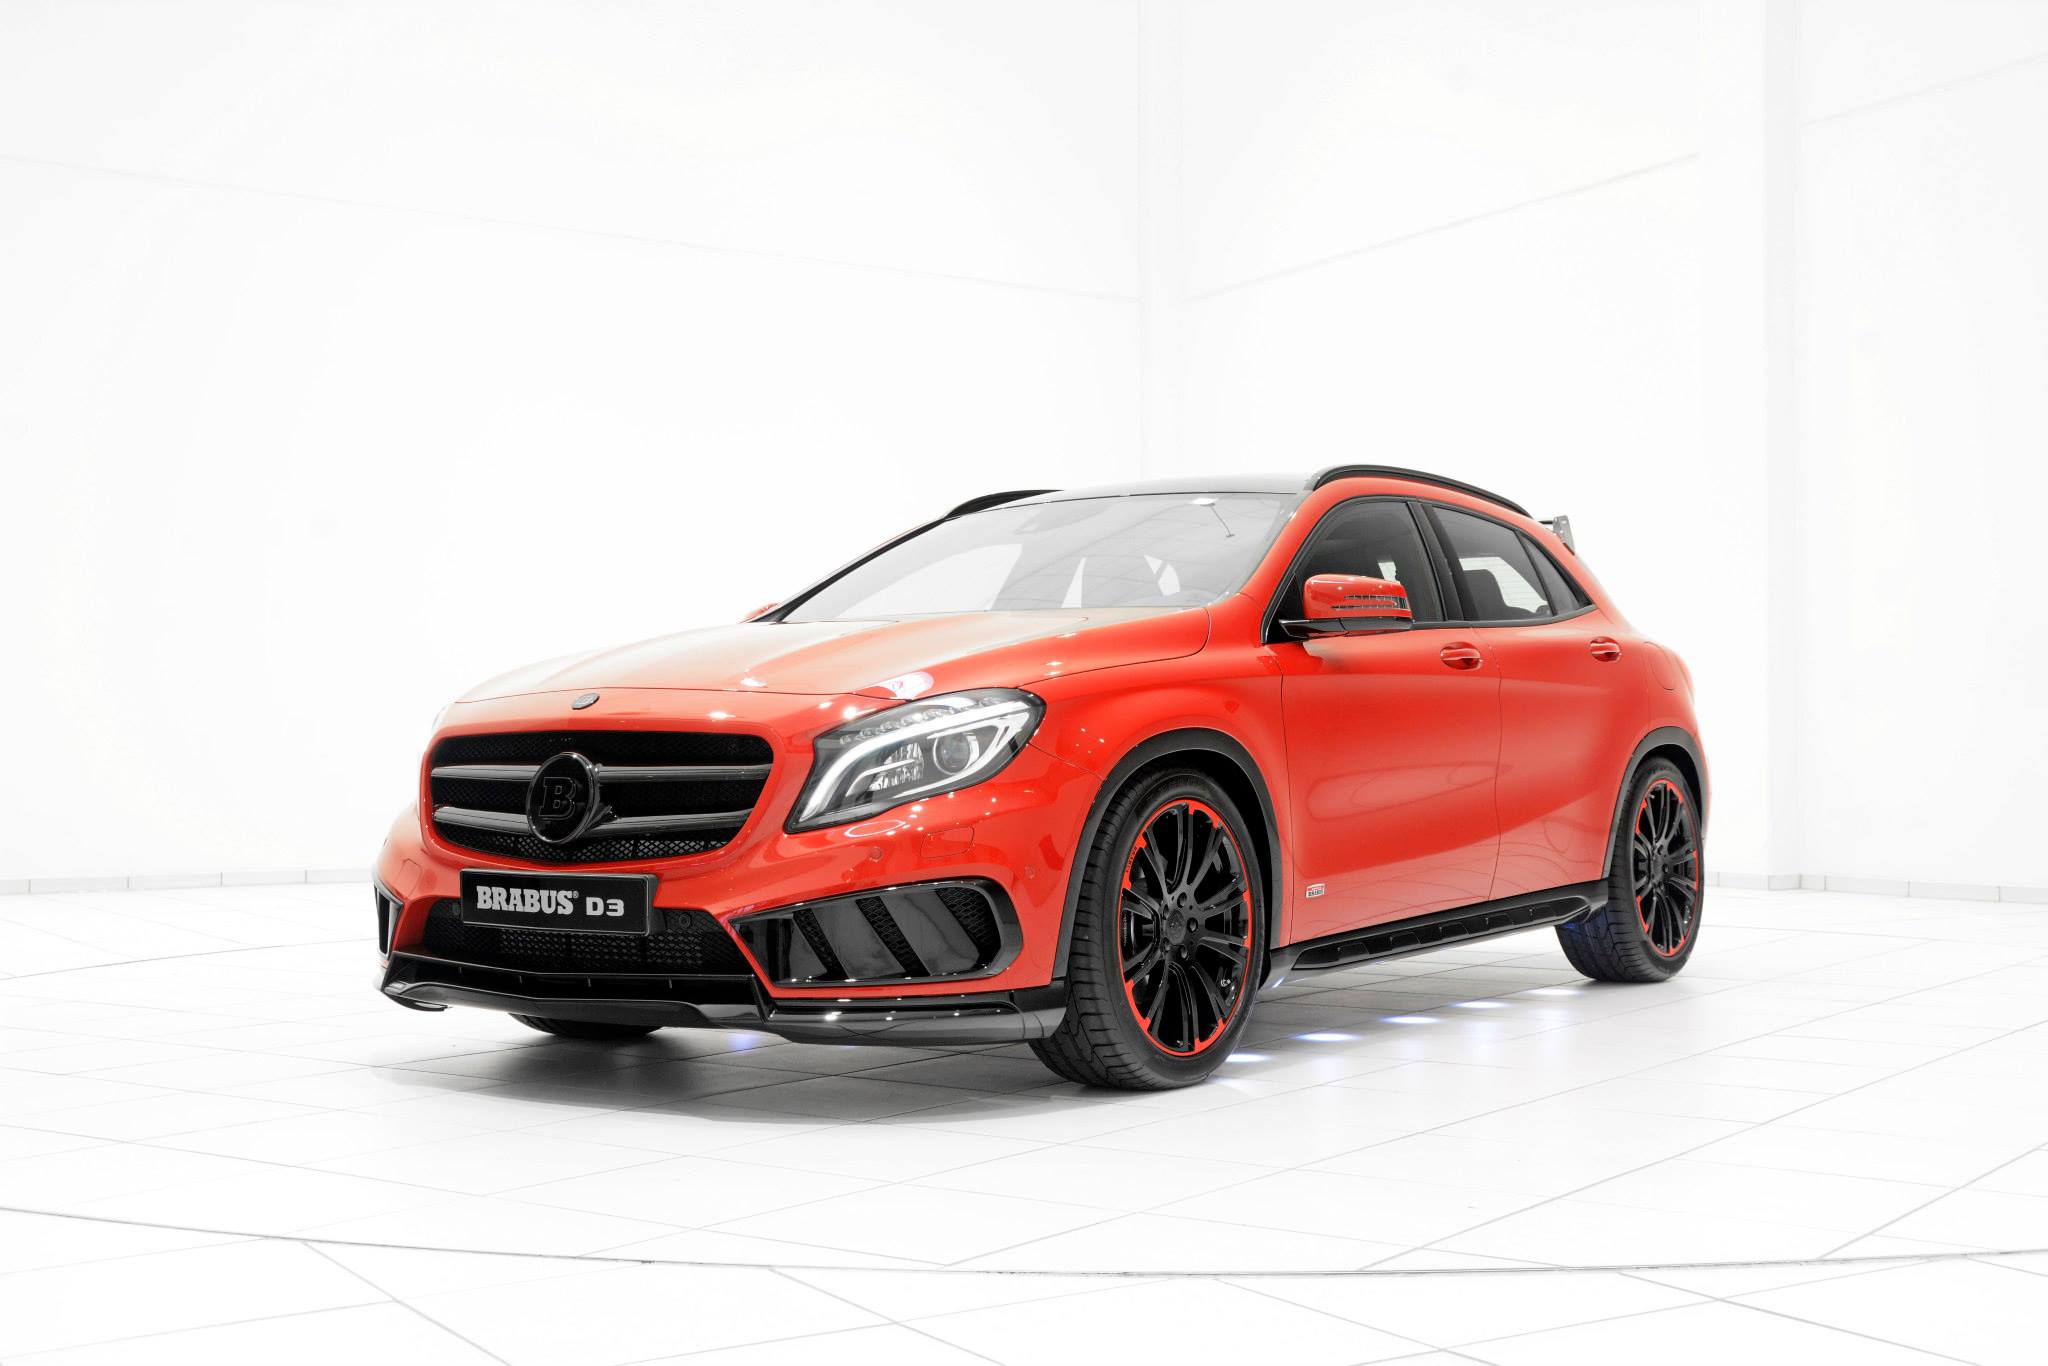 Mercedes Gla Tuned By Brabus Looks Stunning In Red And Black Gets Diesel Power Boost Autoevolution